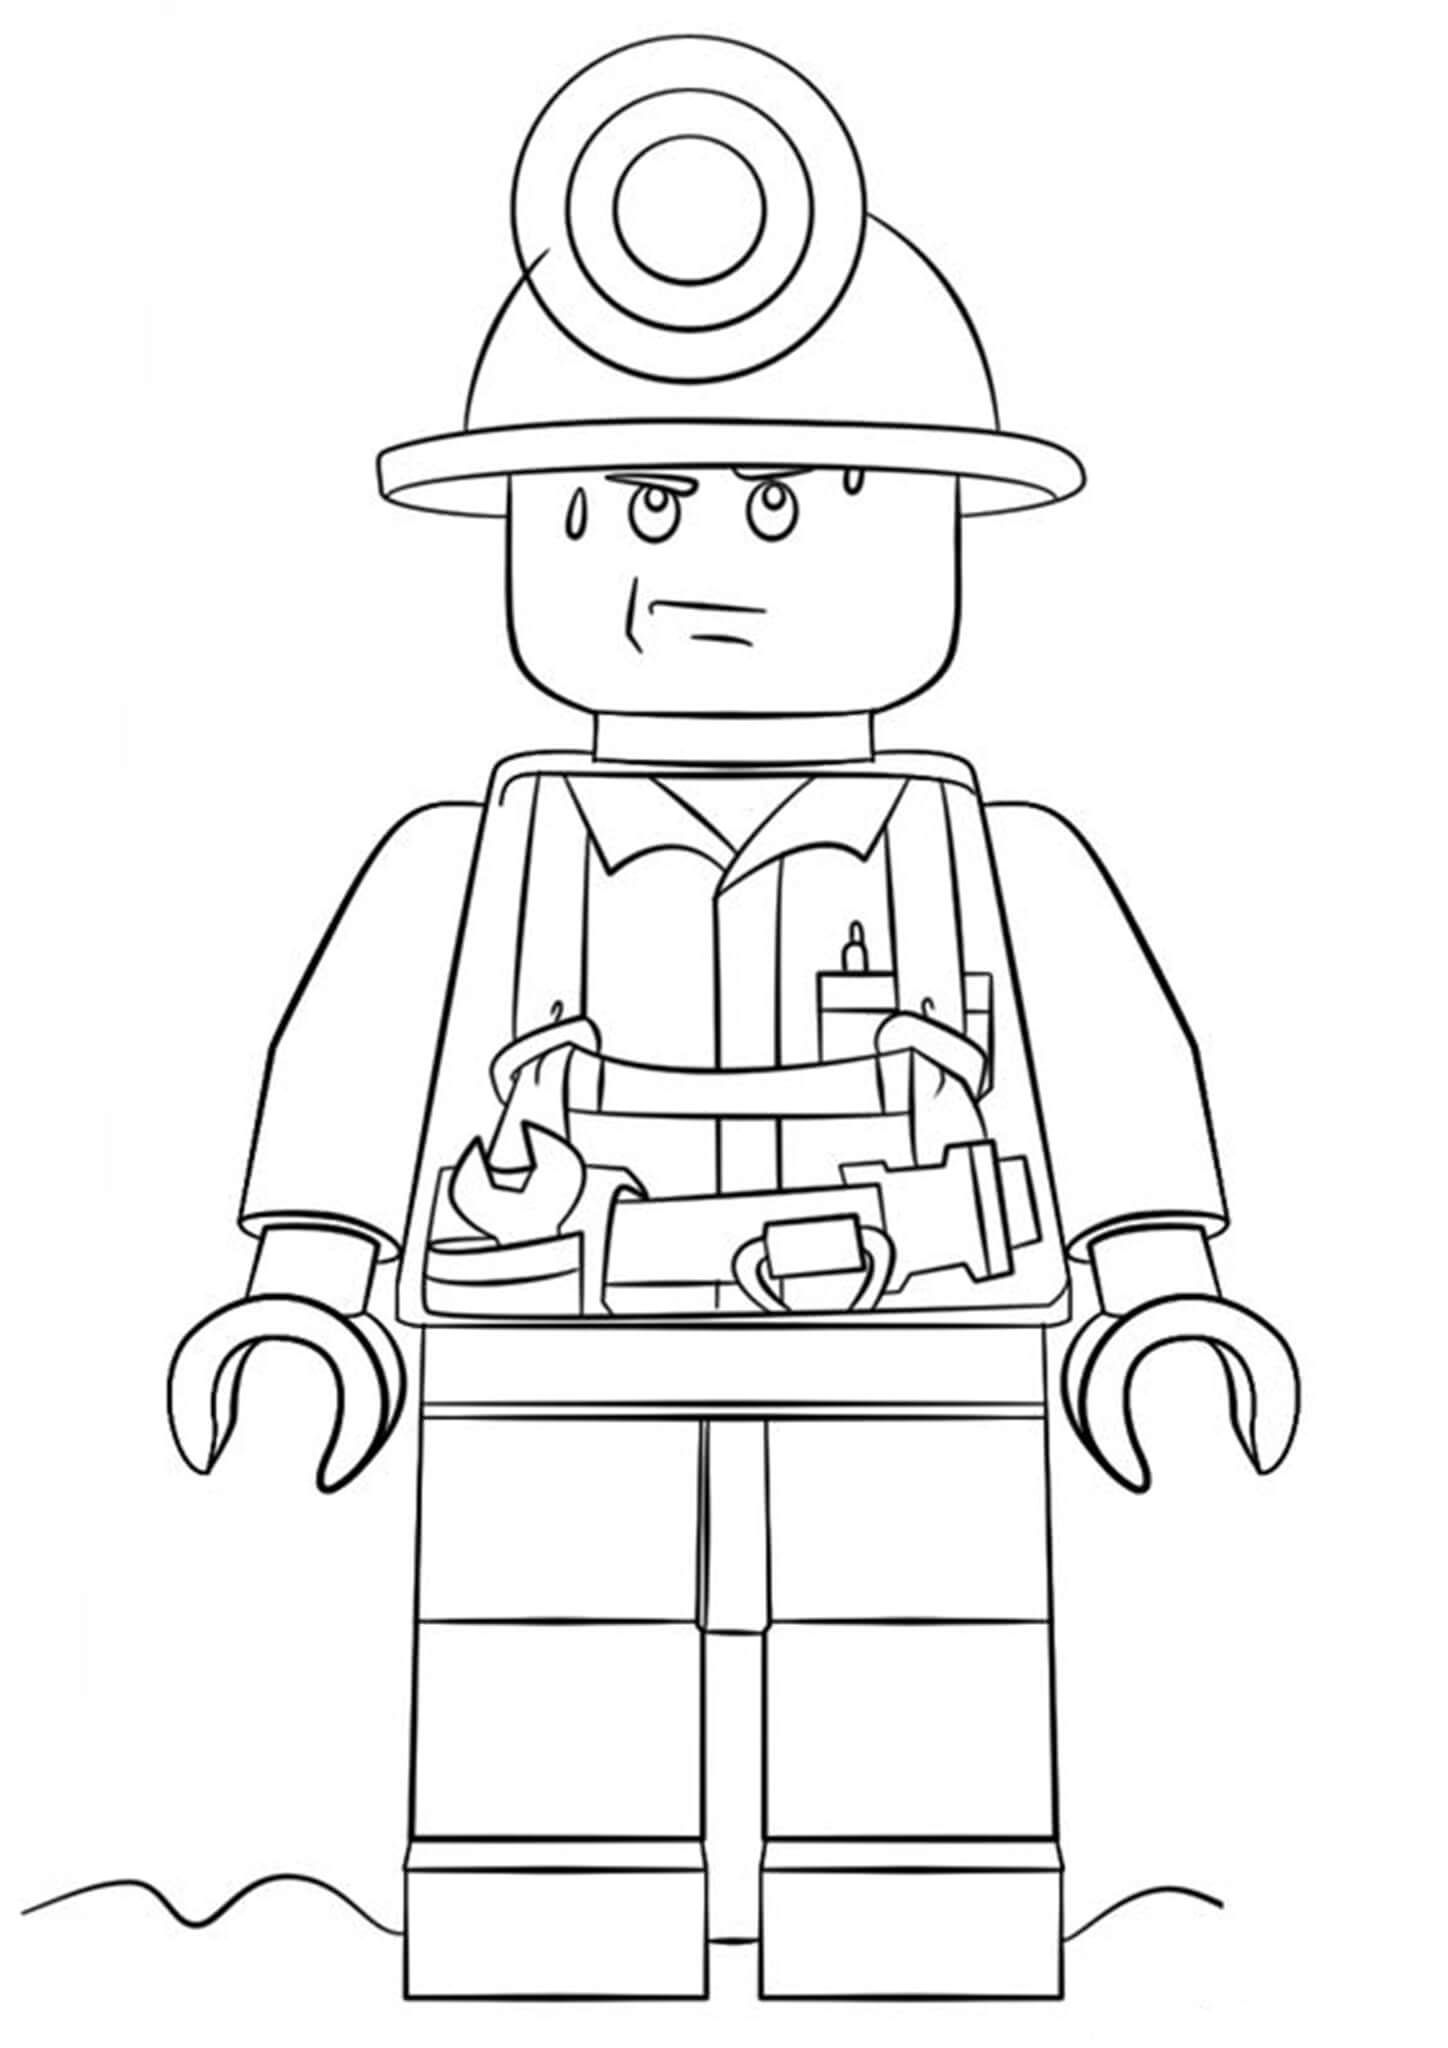 Free easy to print lego coloring pages lego coloring lego coloring pages lego city